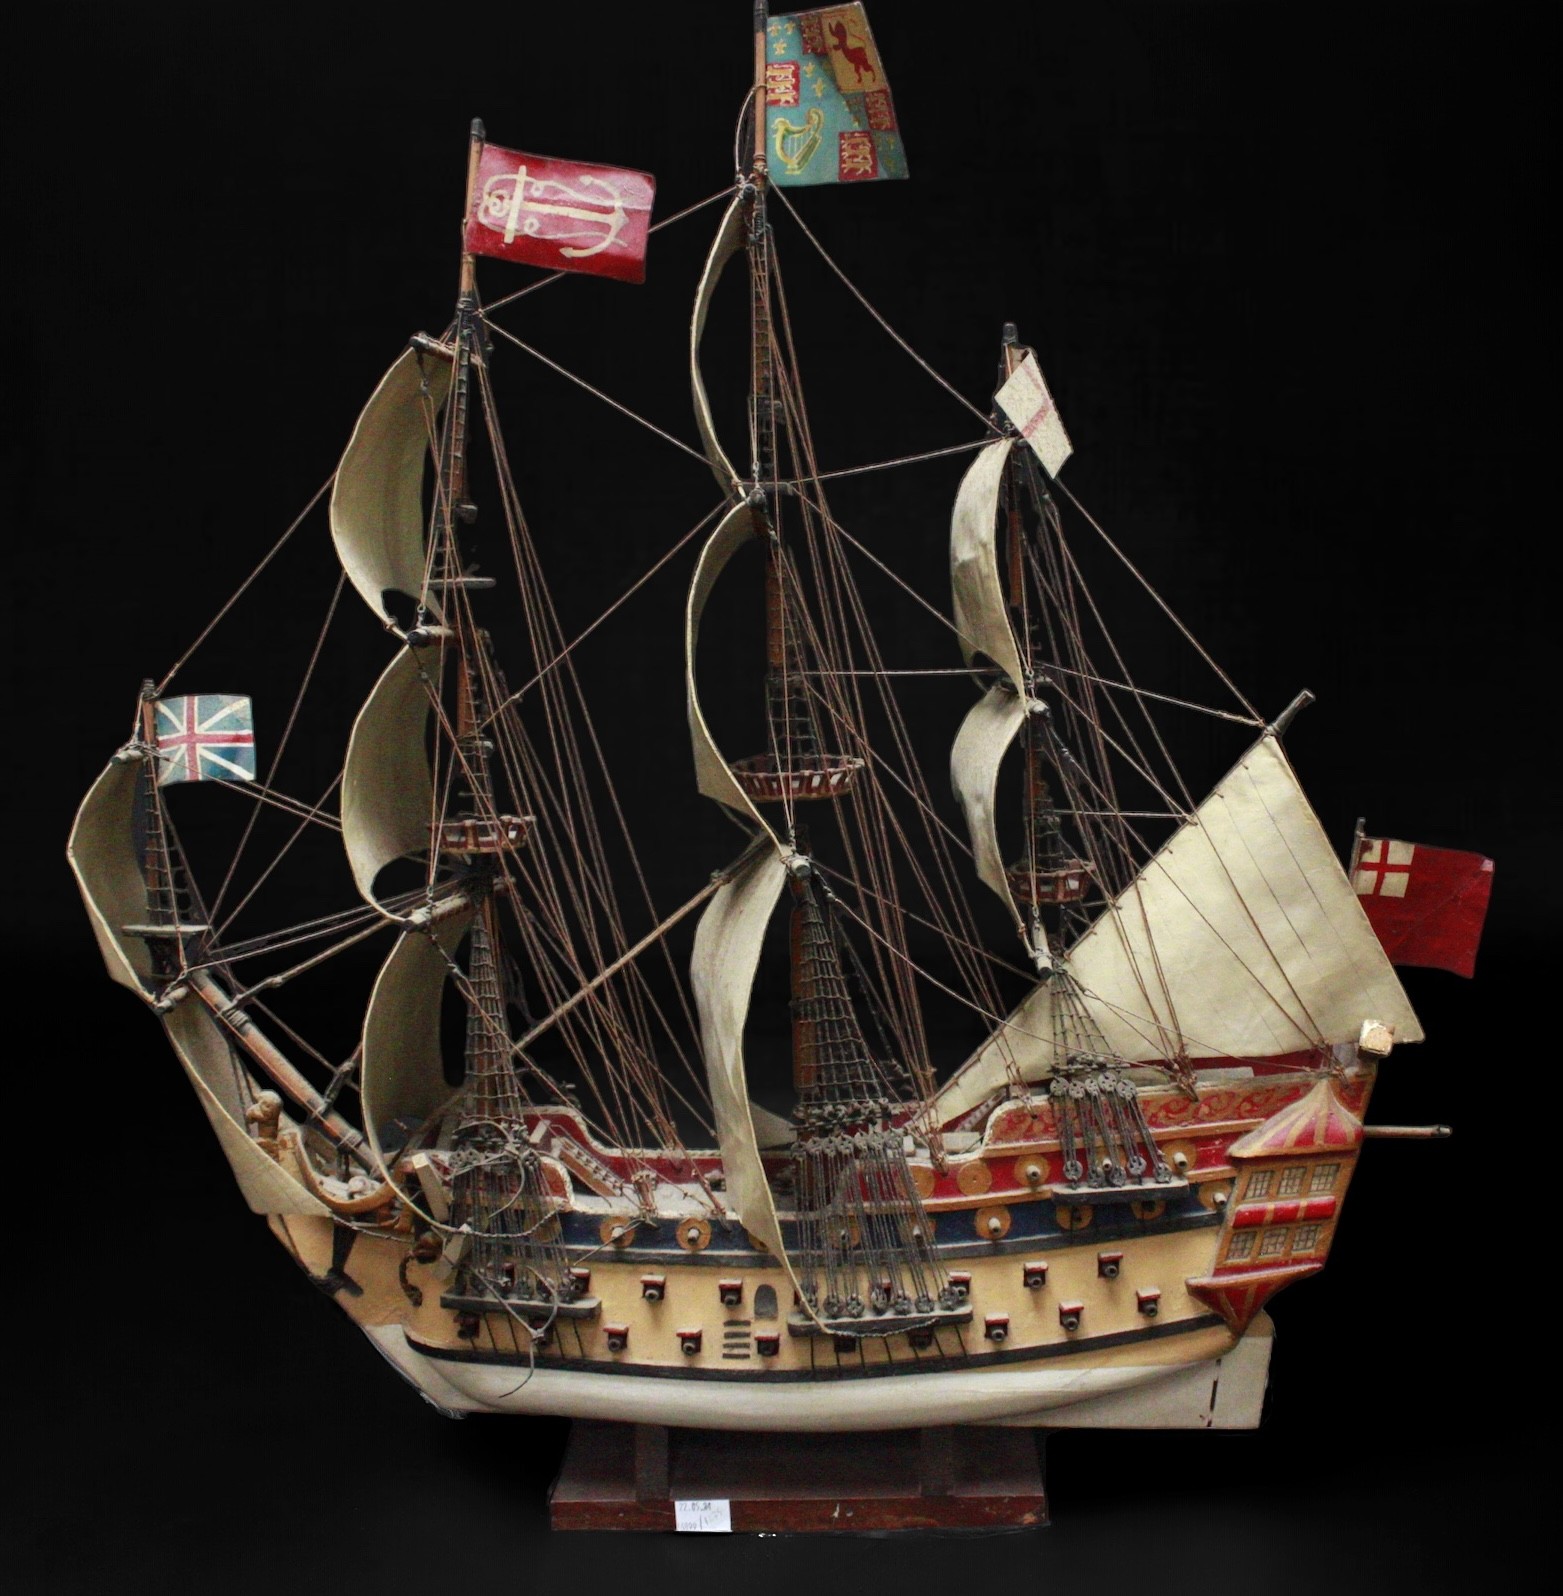 A scratch built wooden three masted model ship in full sail, with two gun decks and rigging, with